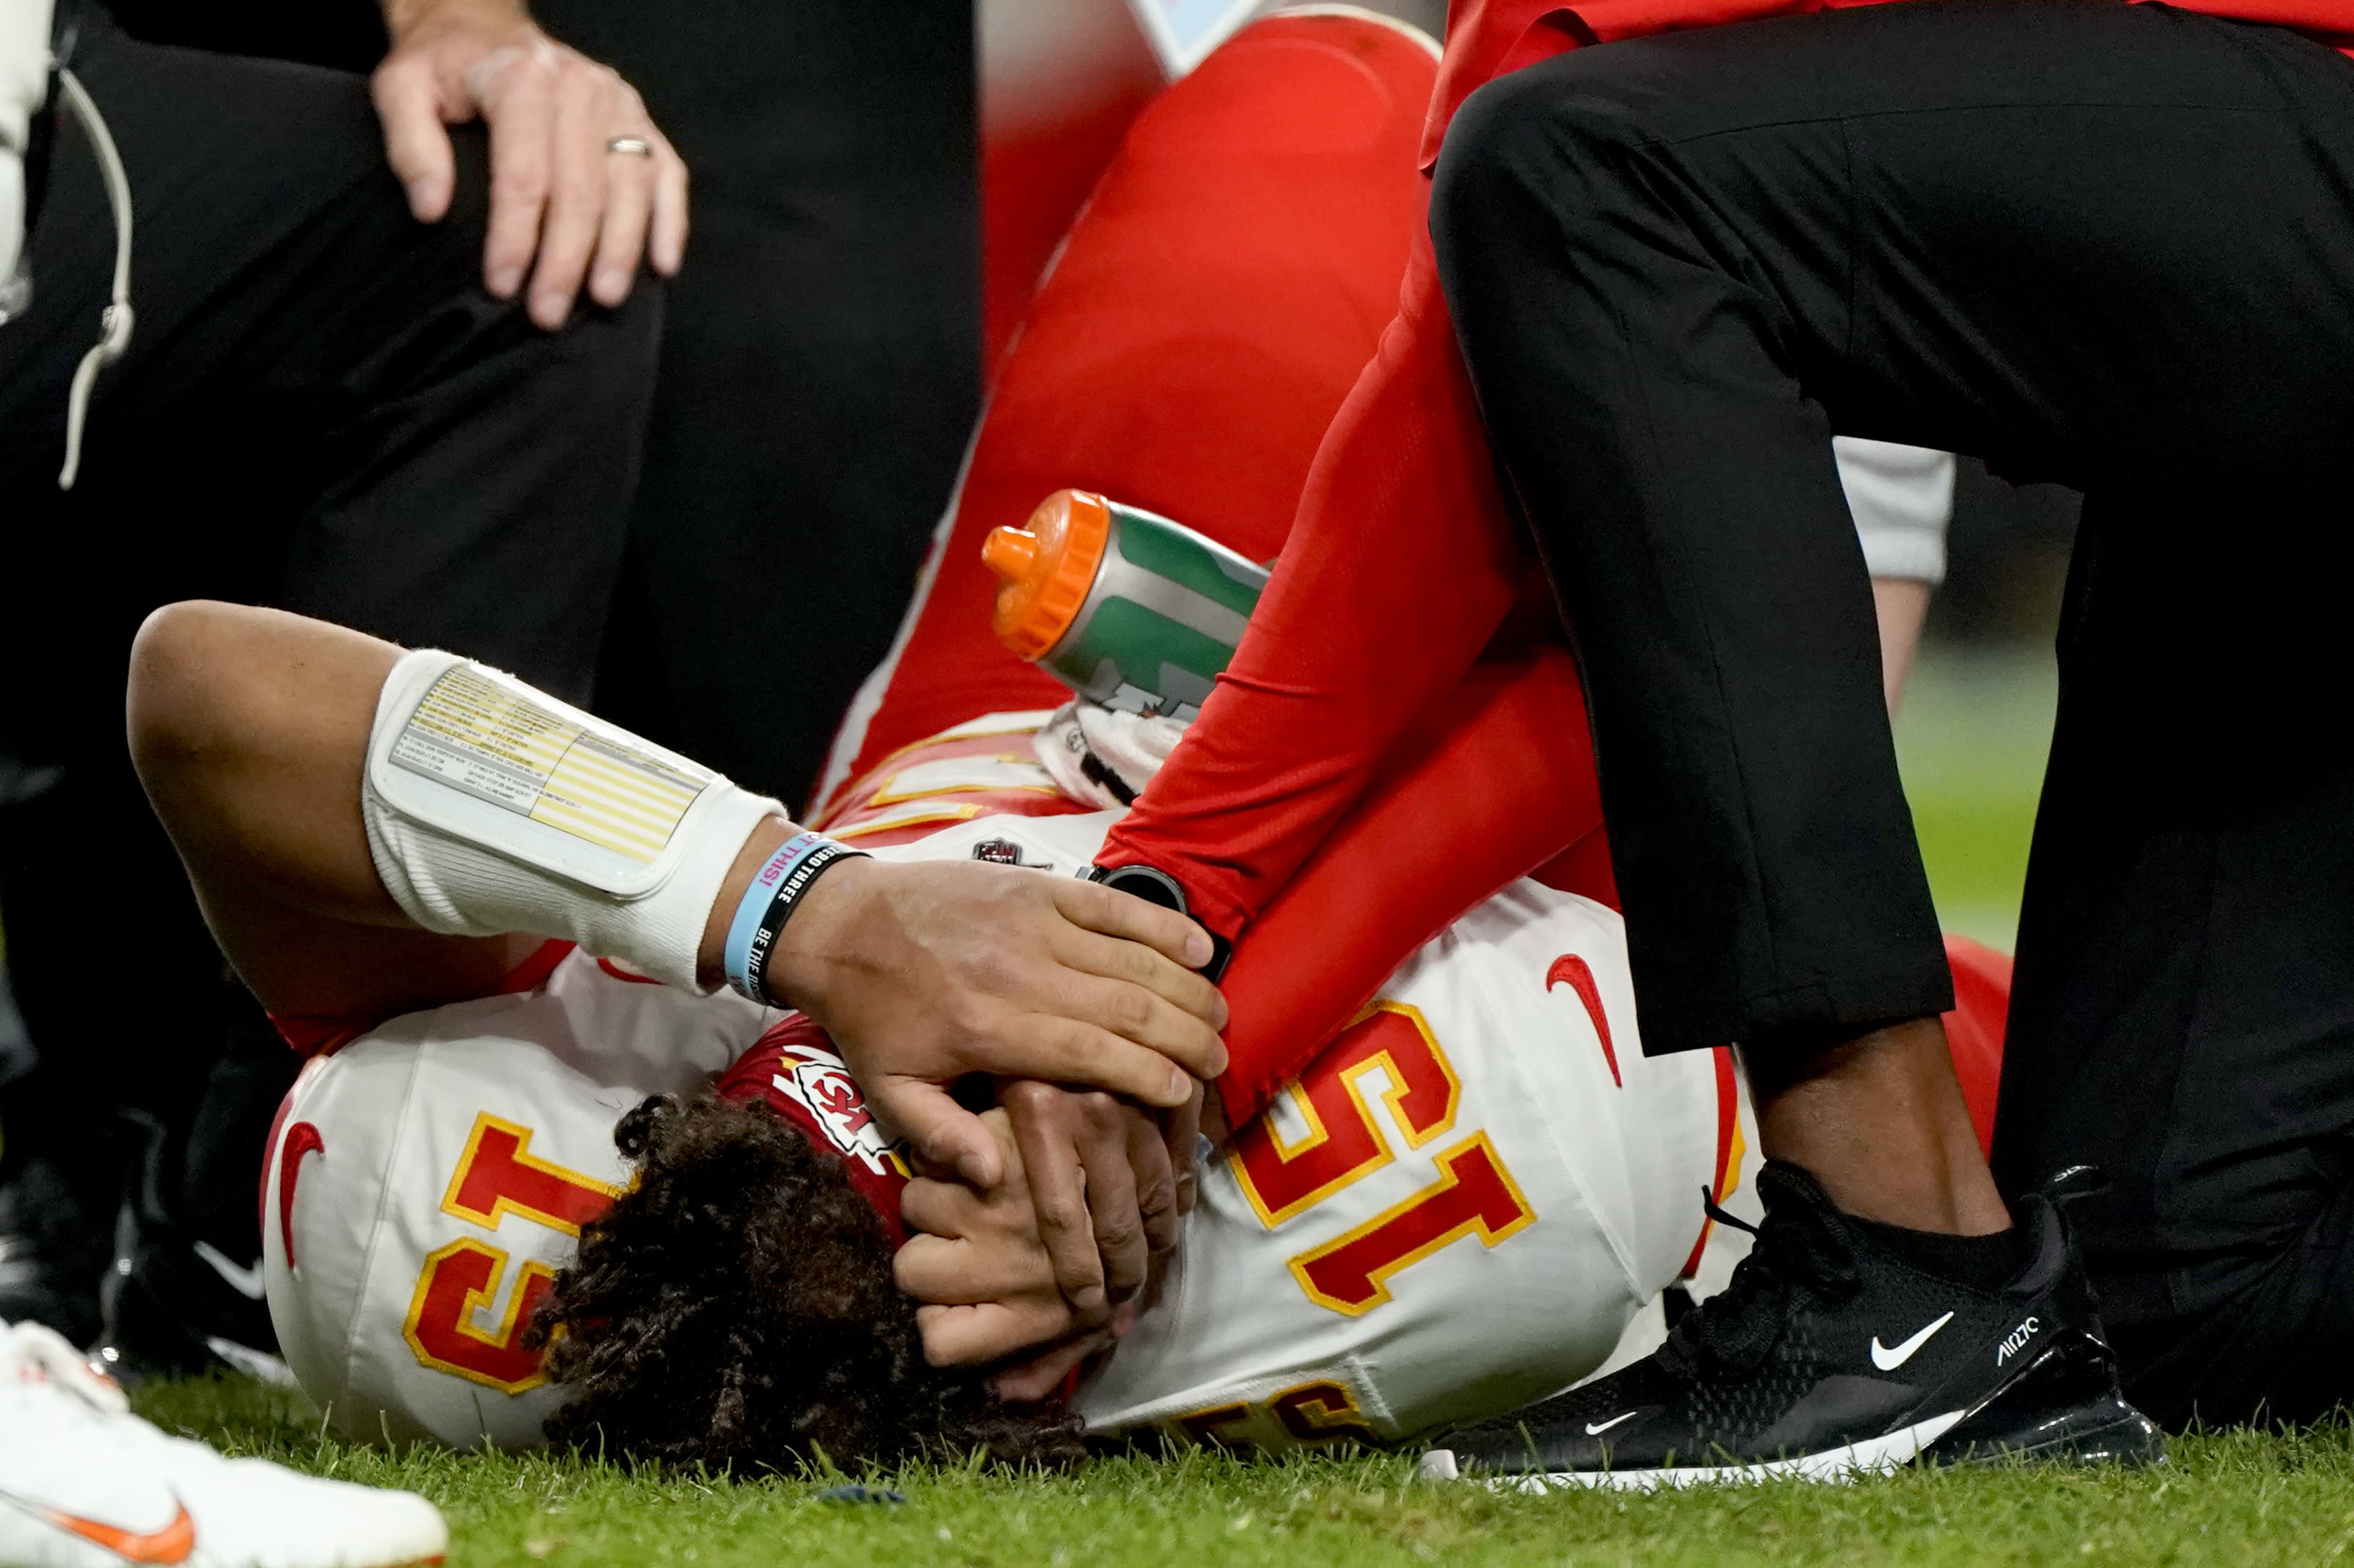 Patrick Mahomes' path to Super Bowl included injury scare